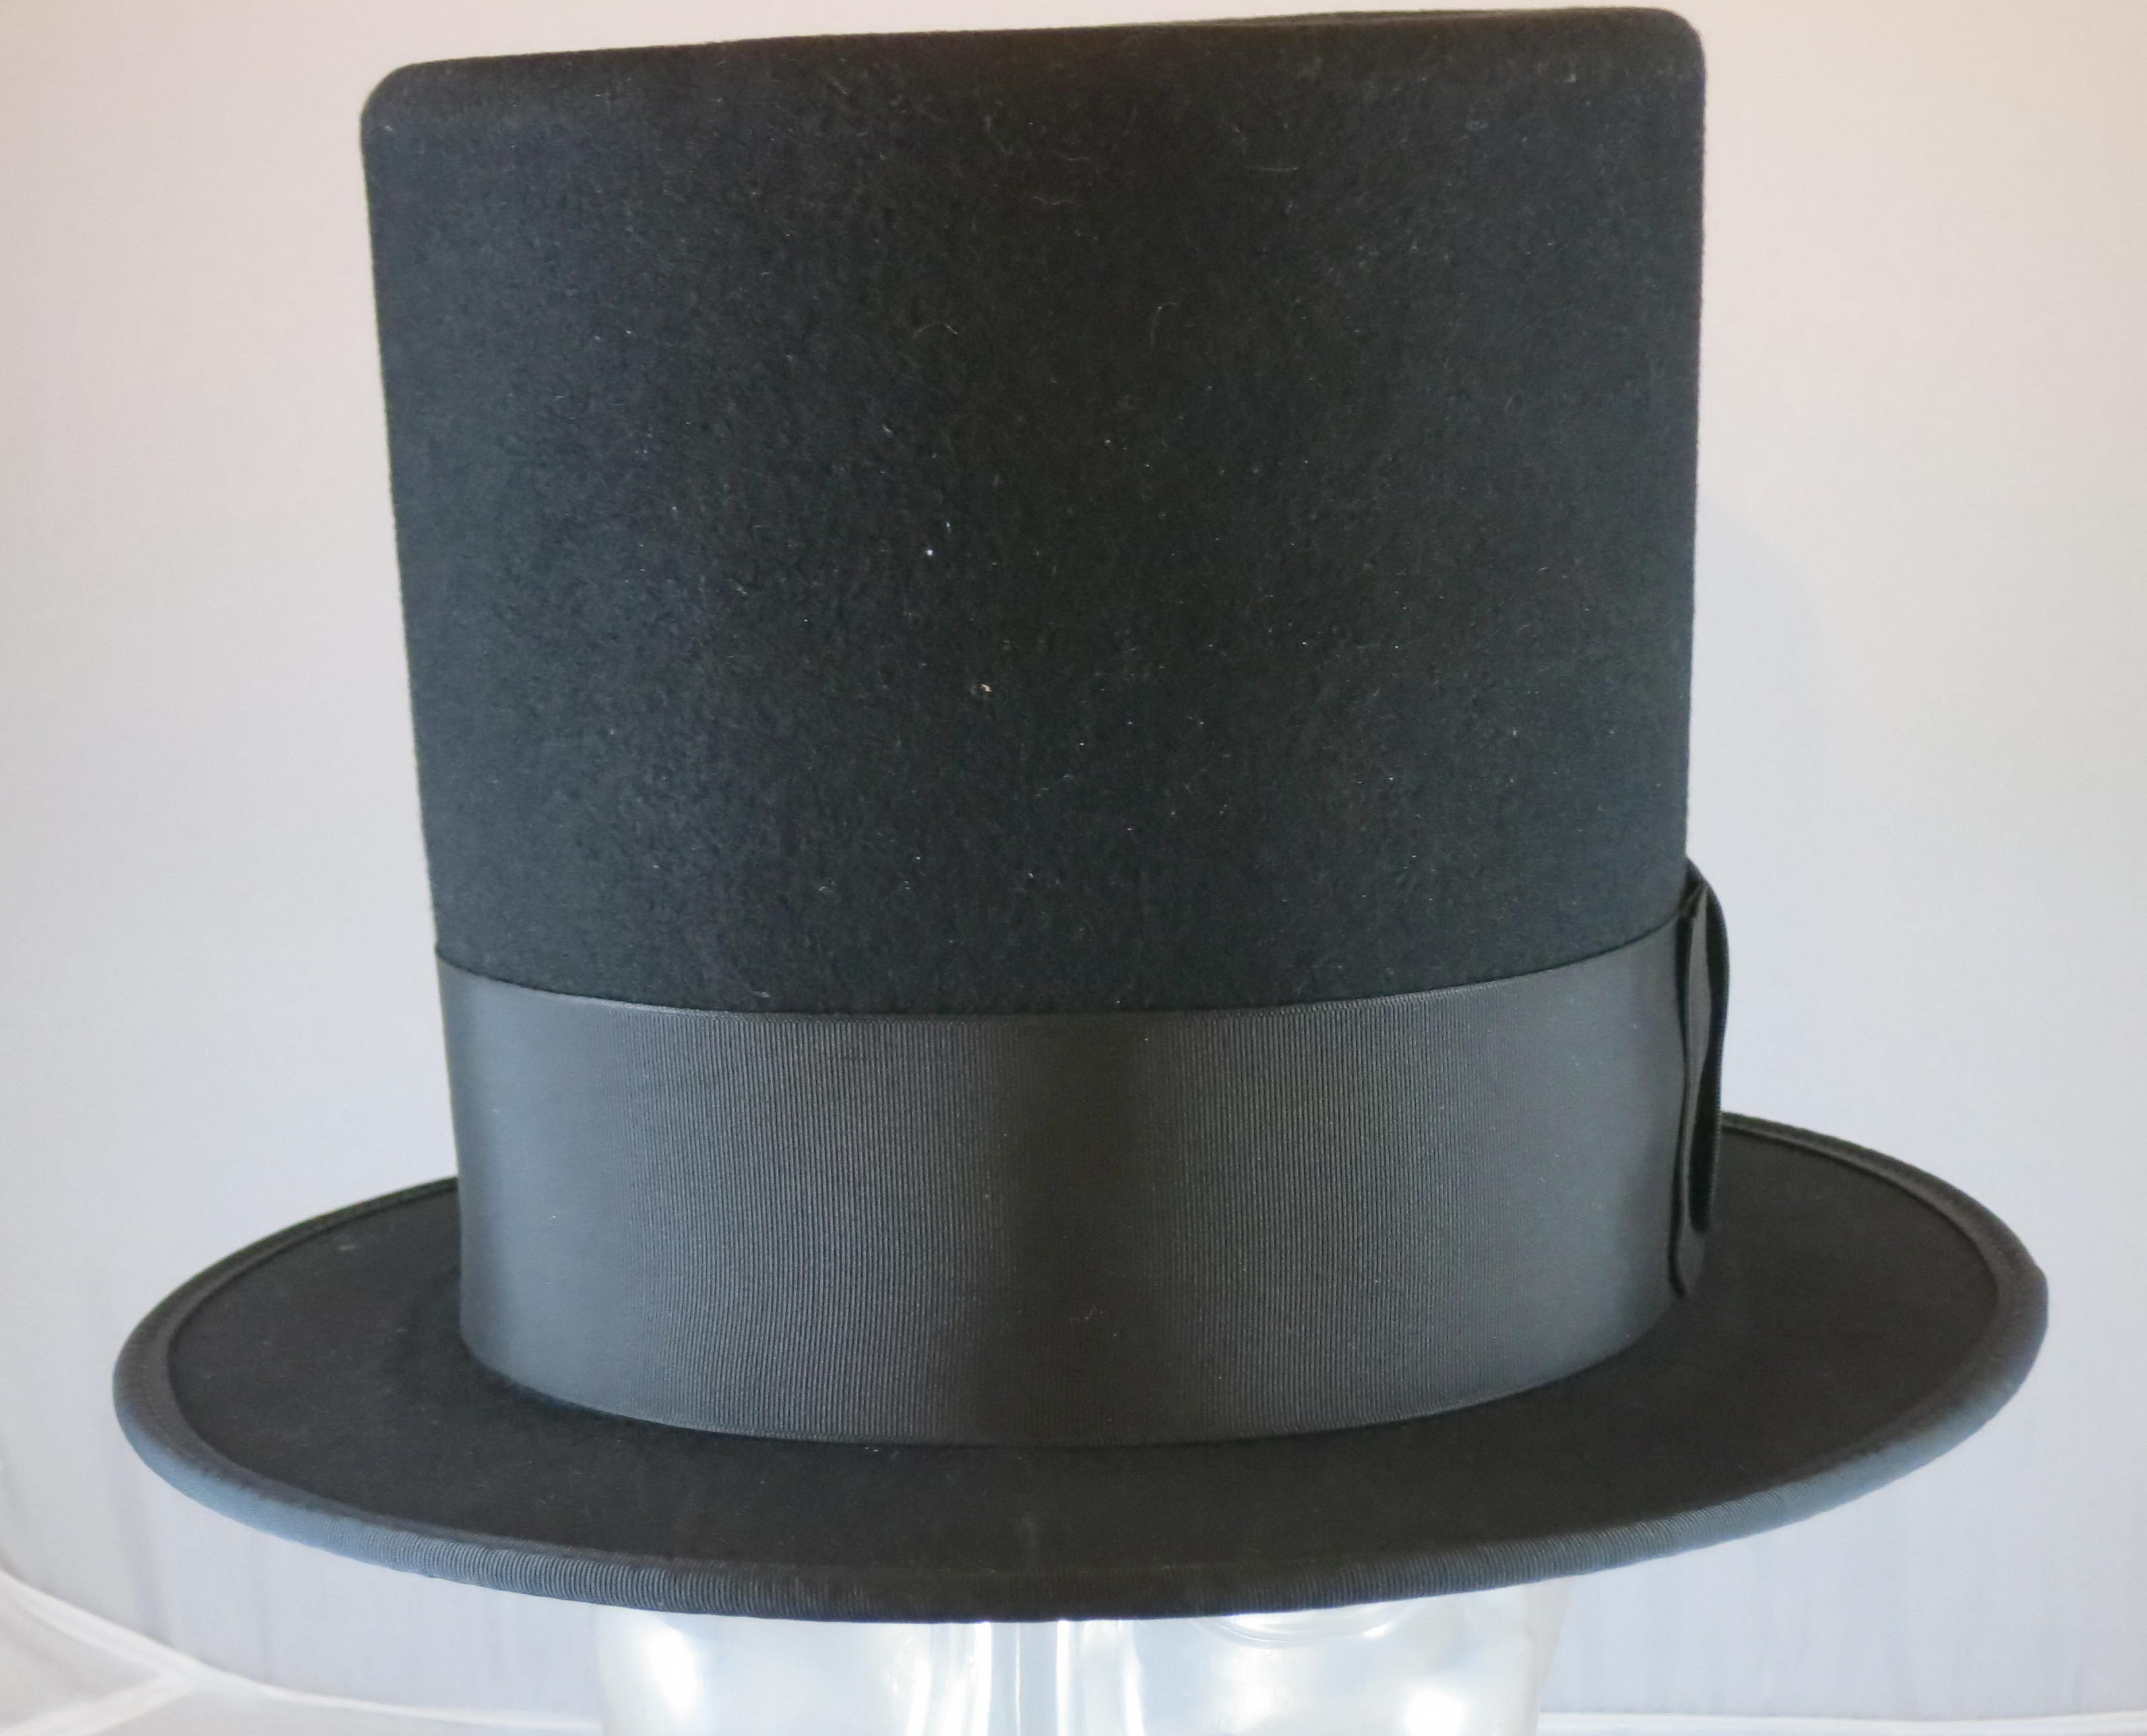 Lincoln Top Hat from Top-Hats.com